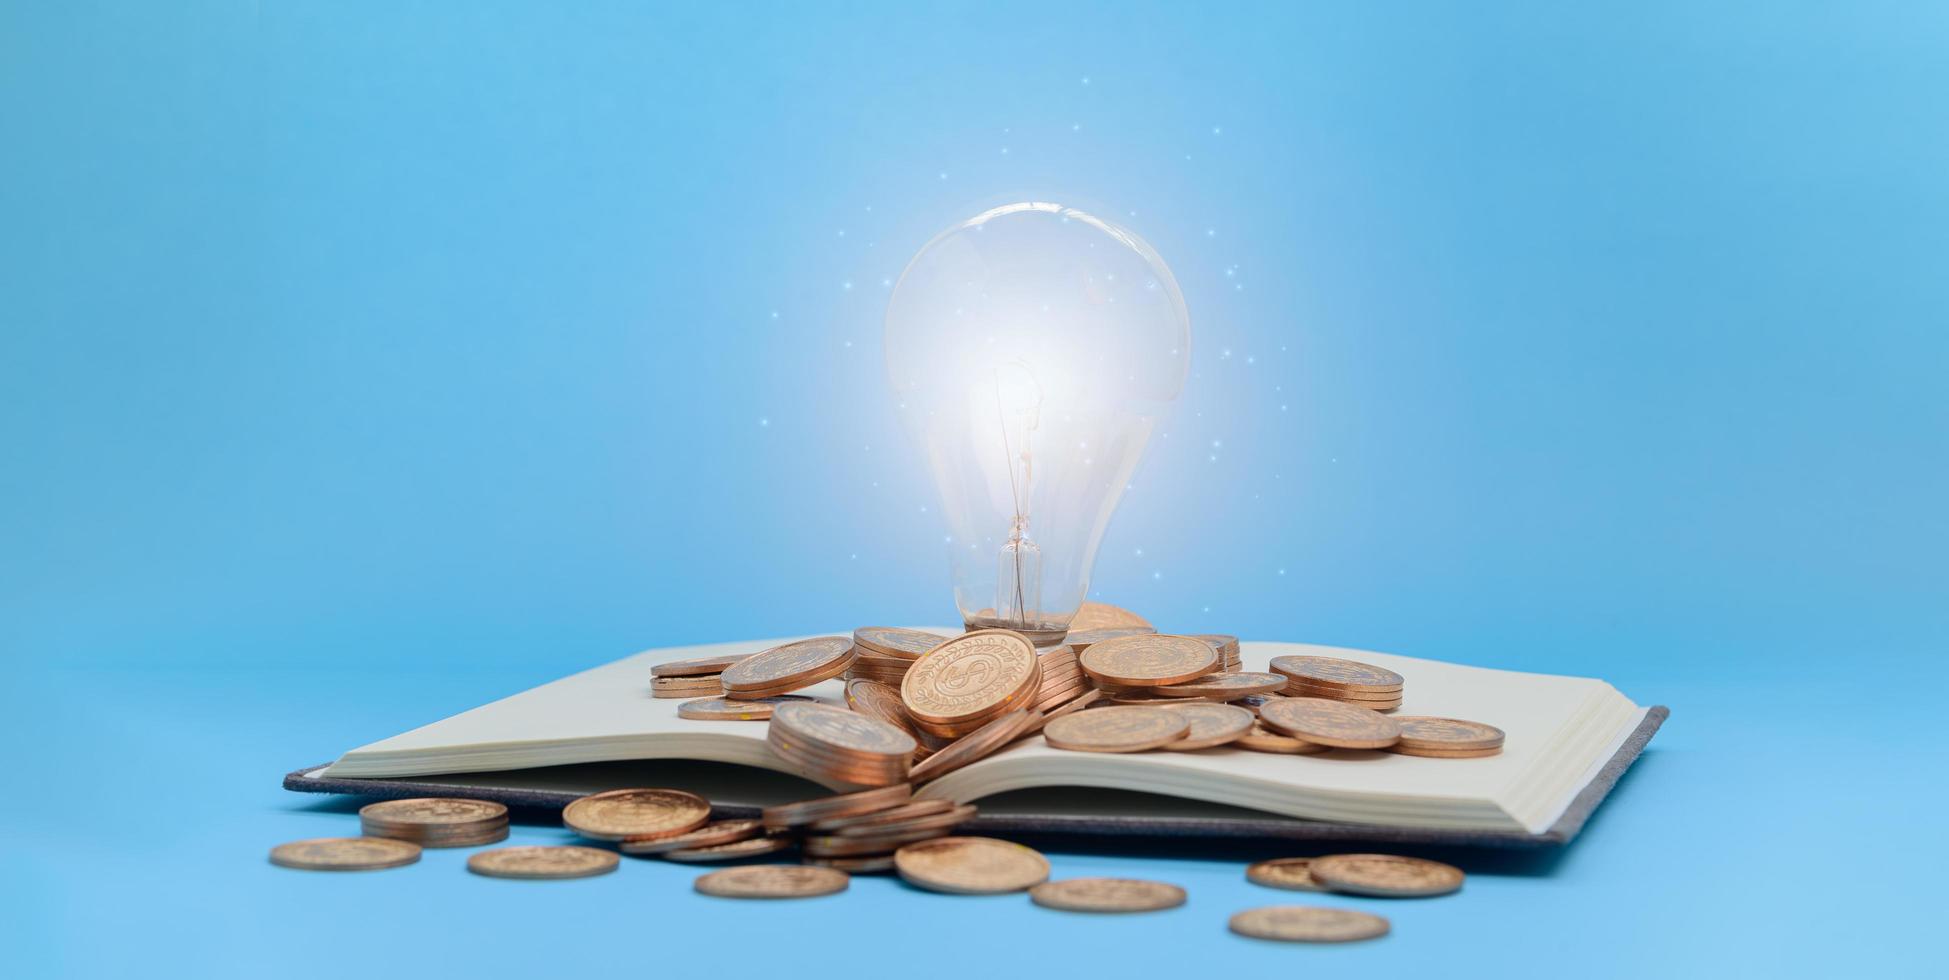 Lightbulb and coins on a book photo